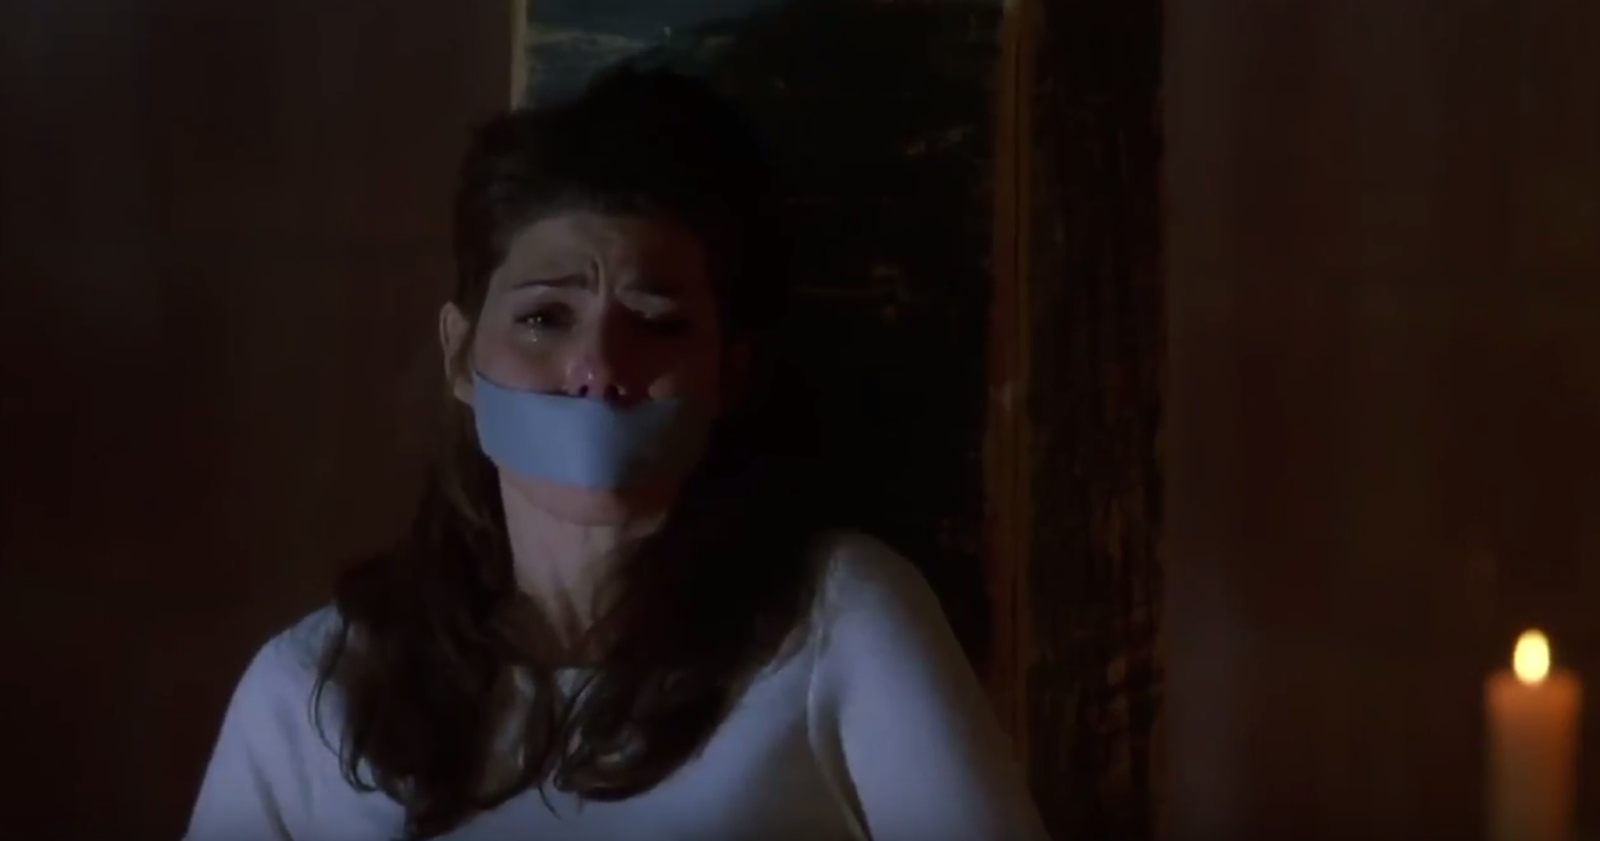 Tape Gagged (The Watcher). 